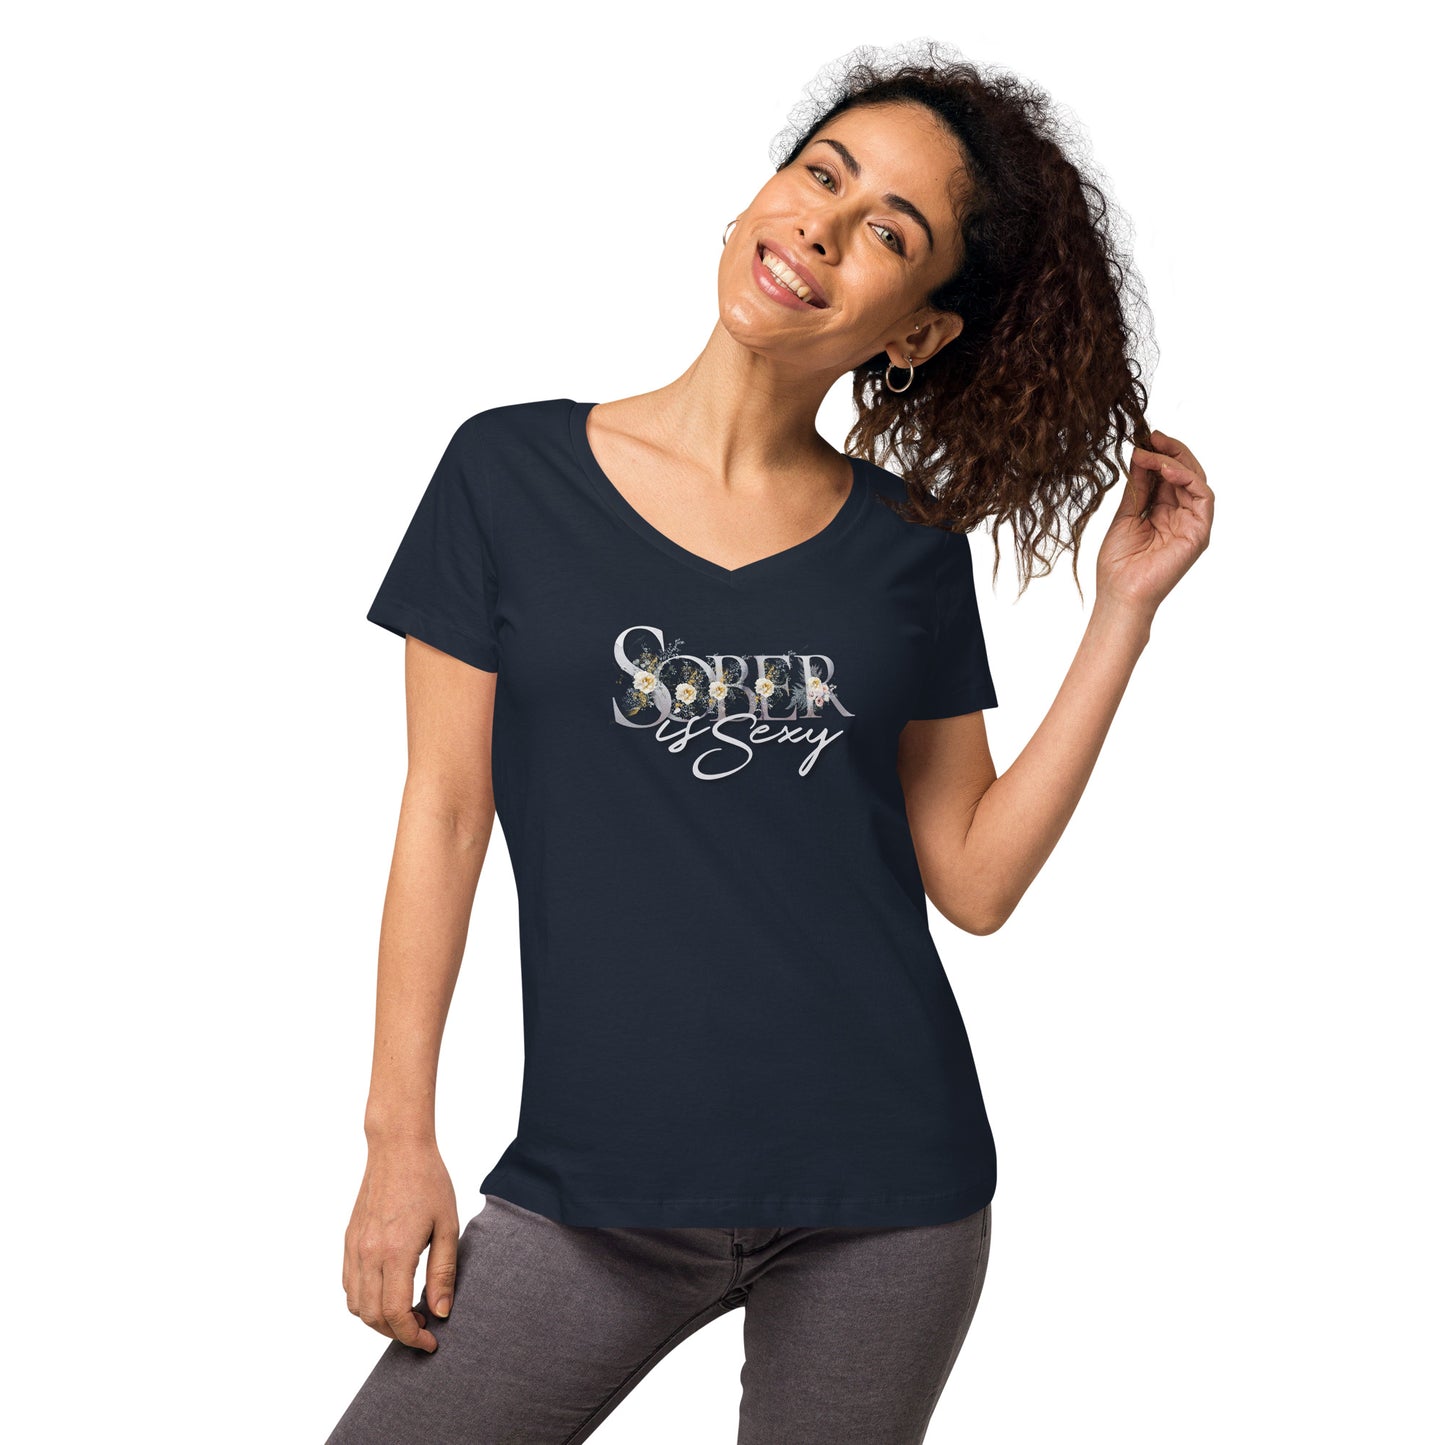 Sober is Sexy - Women’s fitted v-neck t-shirt